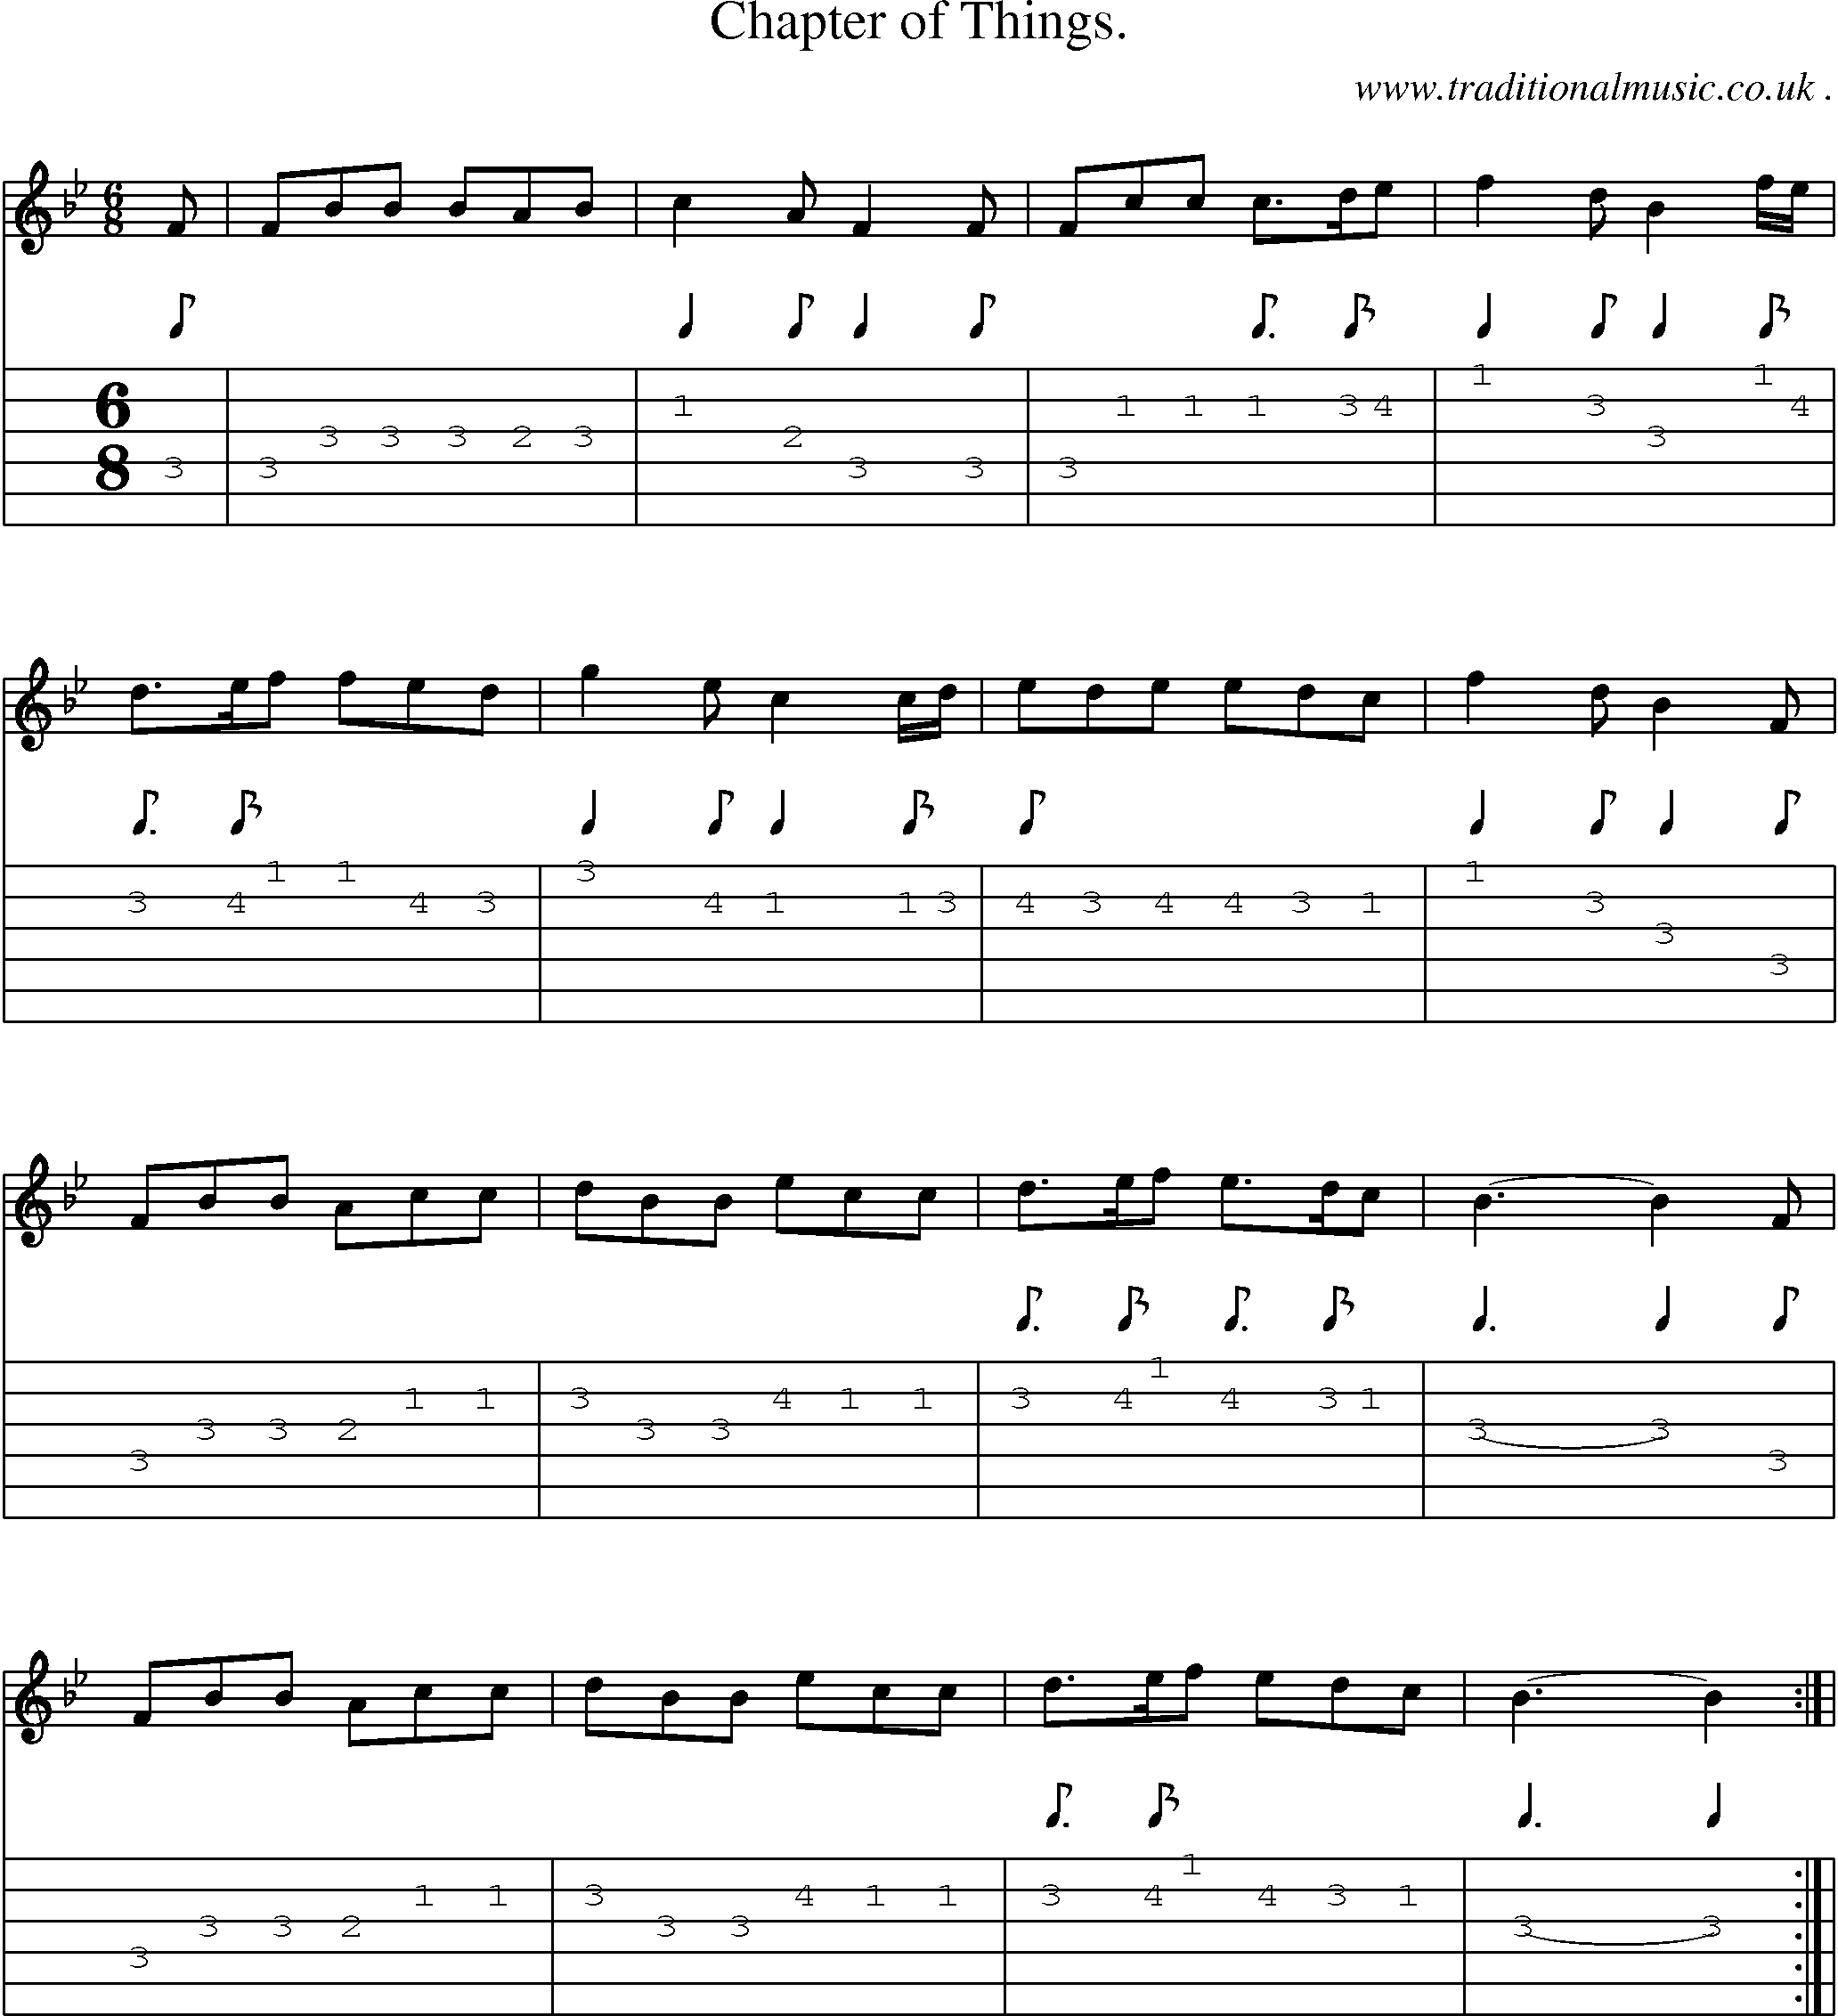 Sheet-Music and Guitar Tabs for Chapter Of Things